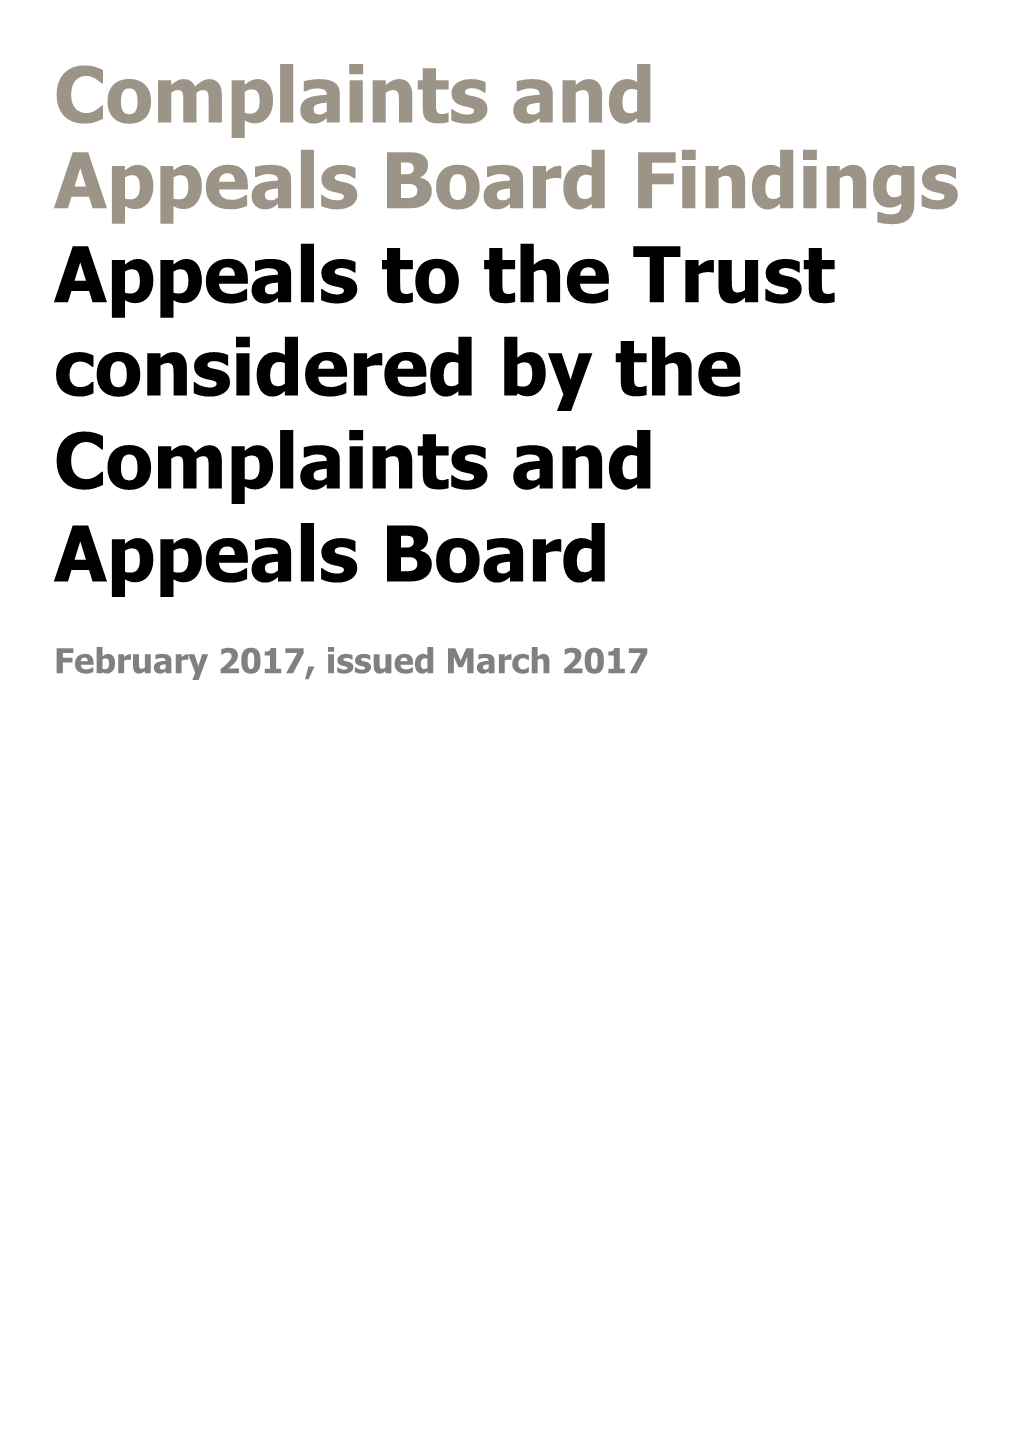 Complaints and Appeals Board Bulletin